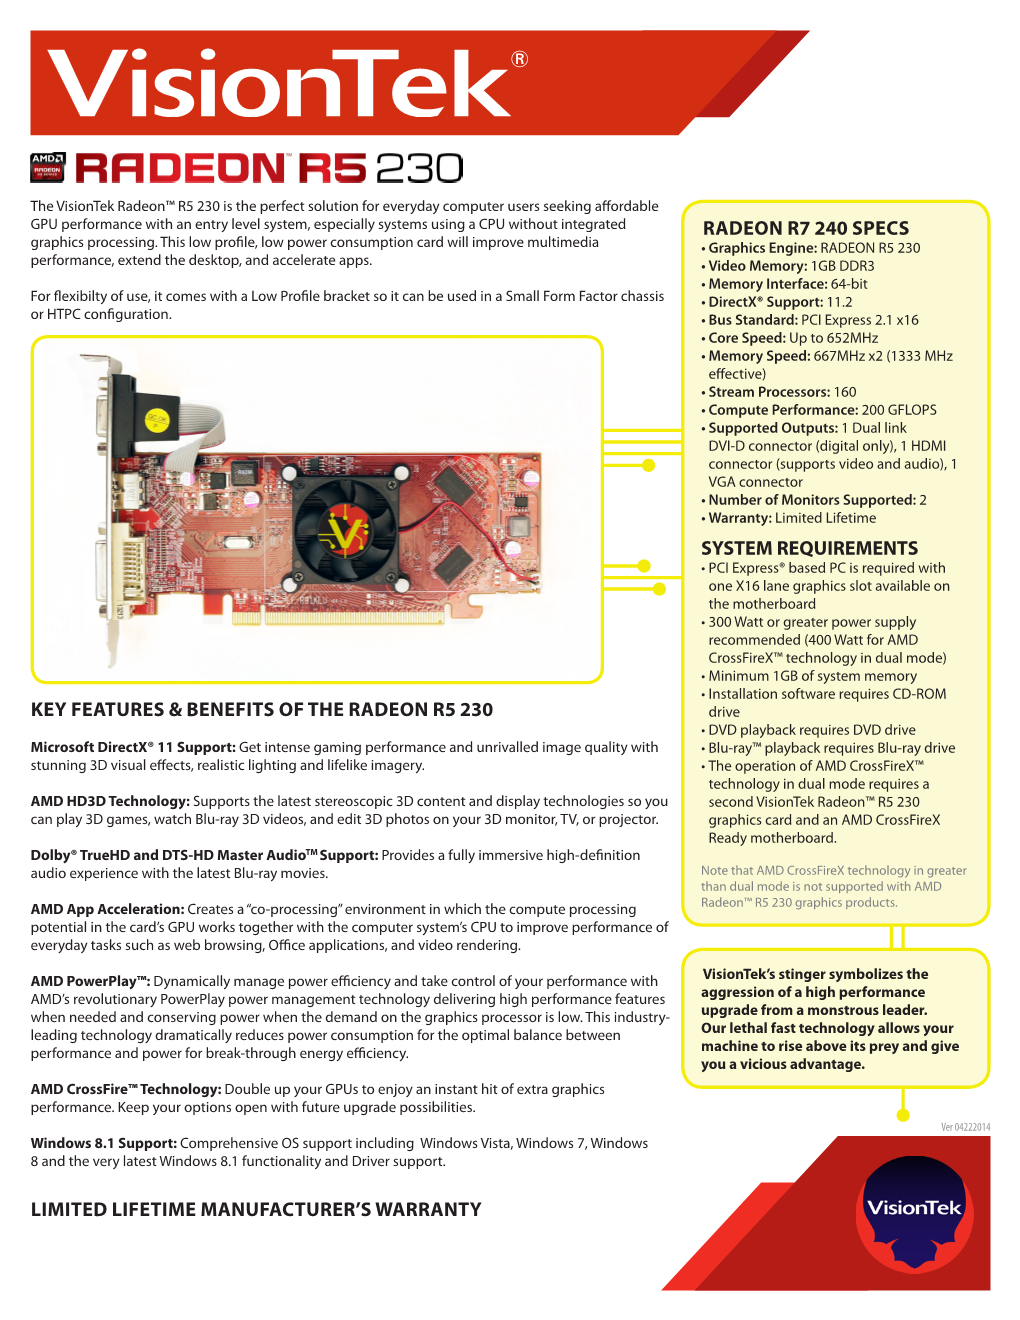 Key Features & Benefits of the Radeon R5 230 Limited